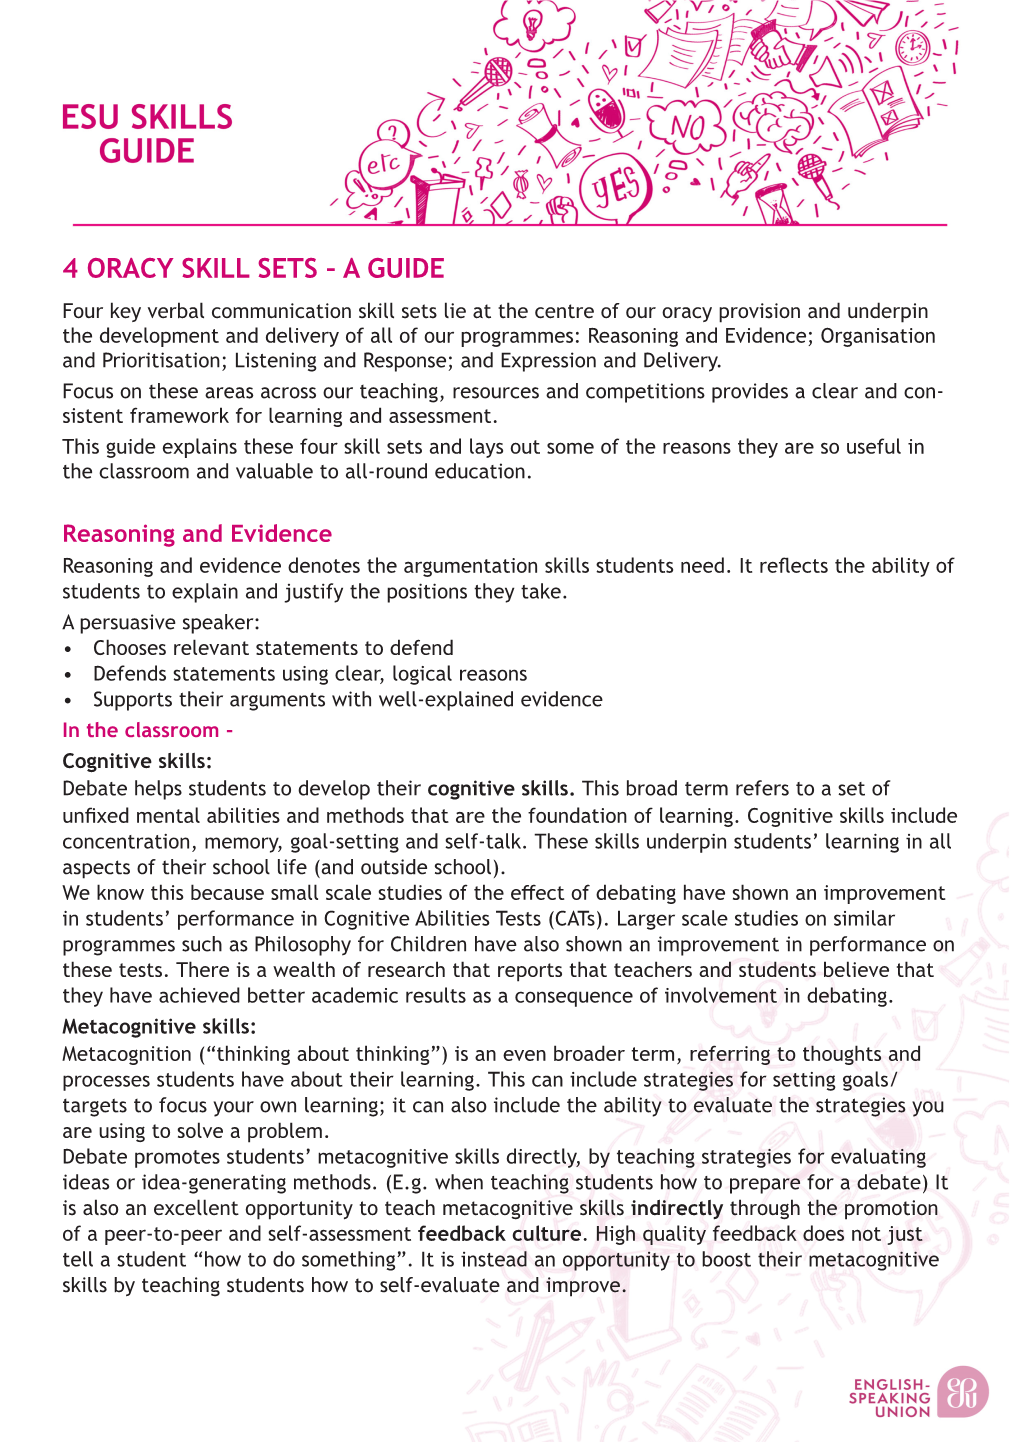 4 Oracy Skill Sets – a Guide